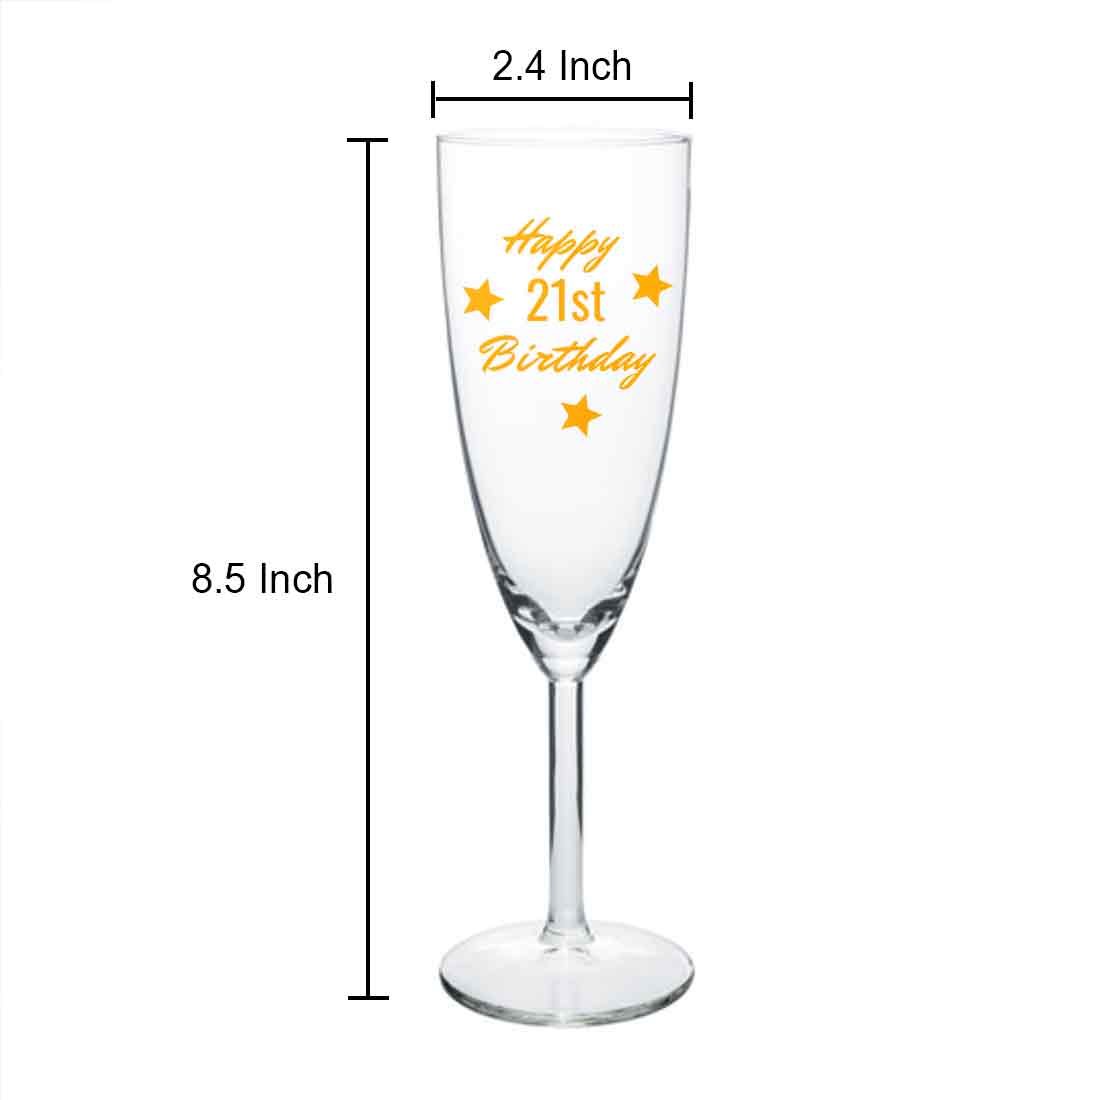 Personalized Champagne Glass Birthday Gifts Idea - Happy Birthday